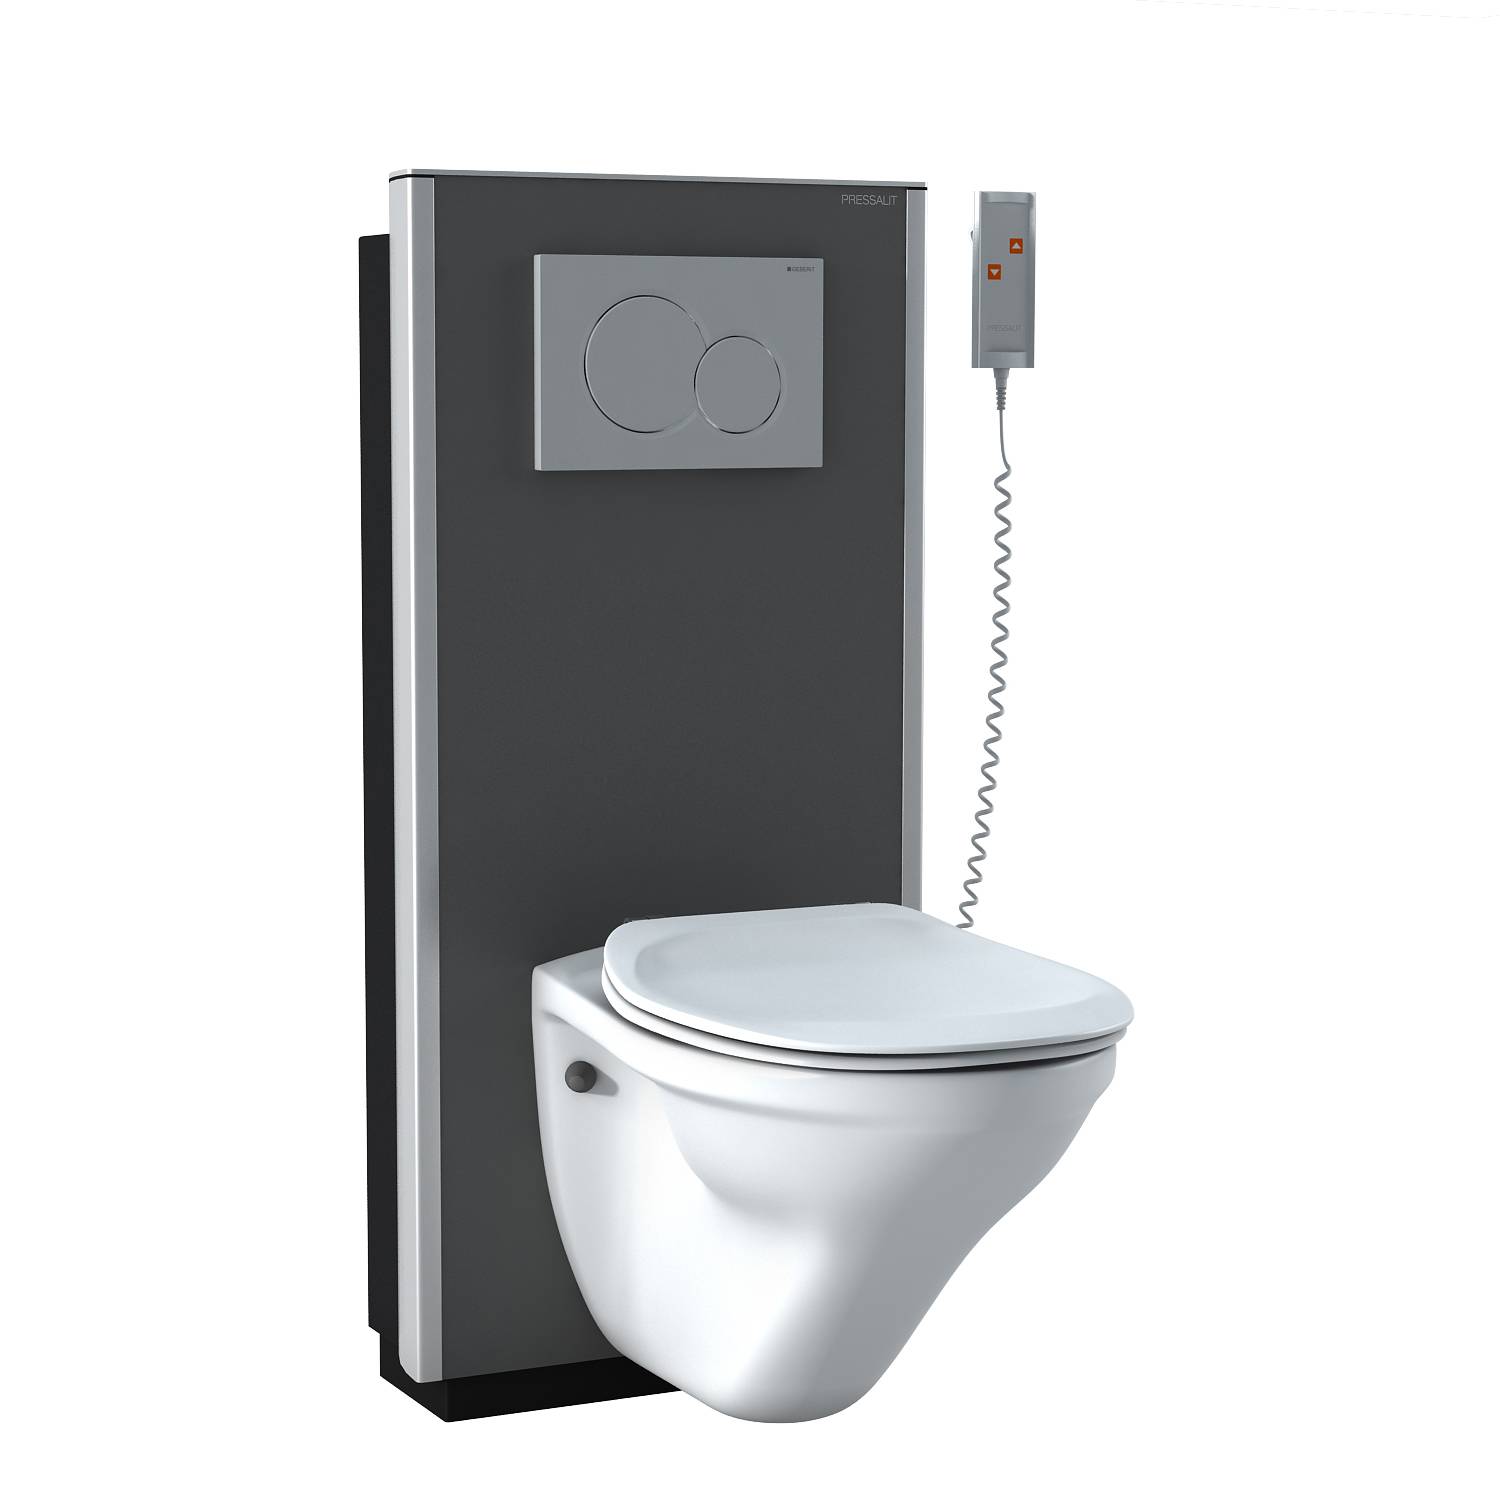 SELECT Toilet Lifter - powered with wall outlet